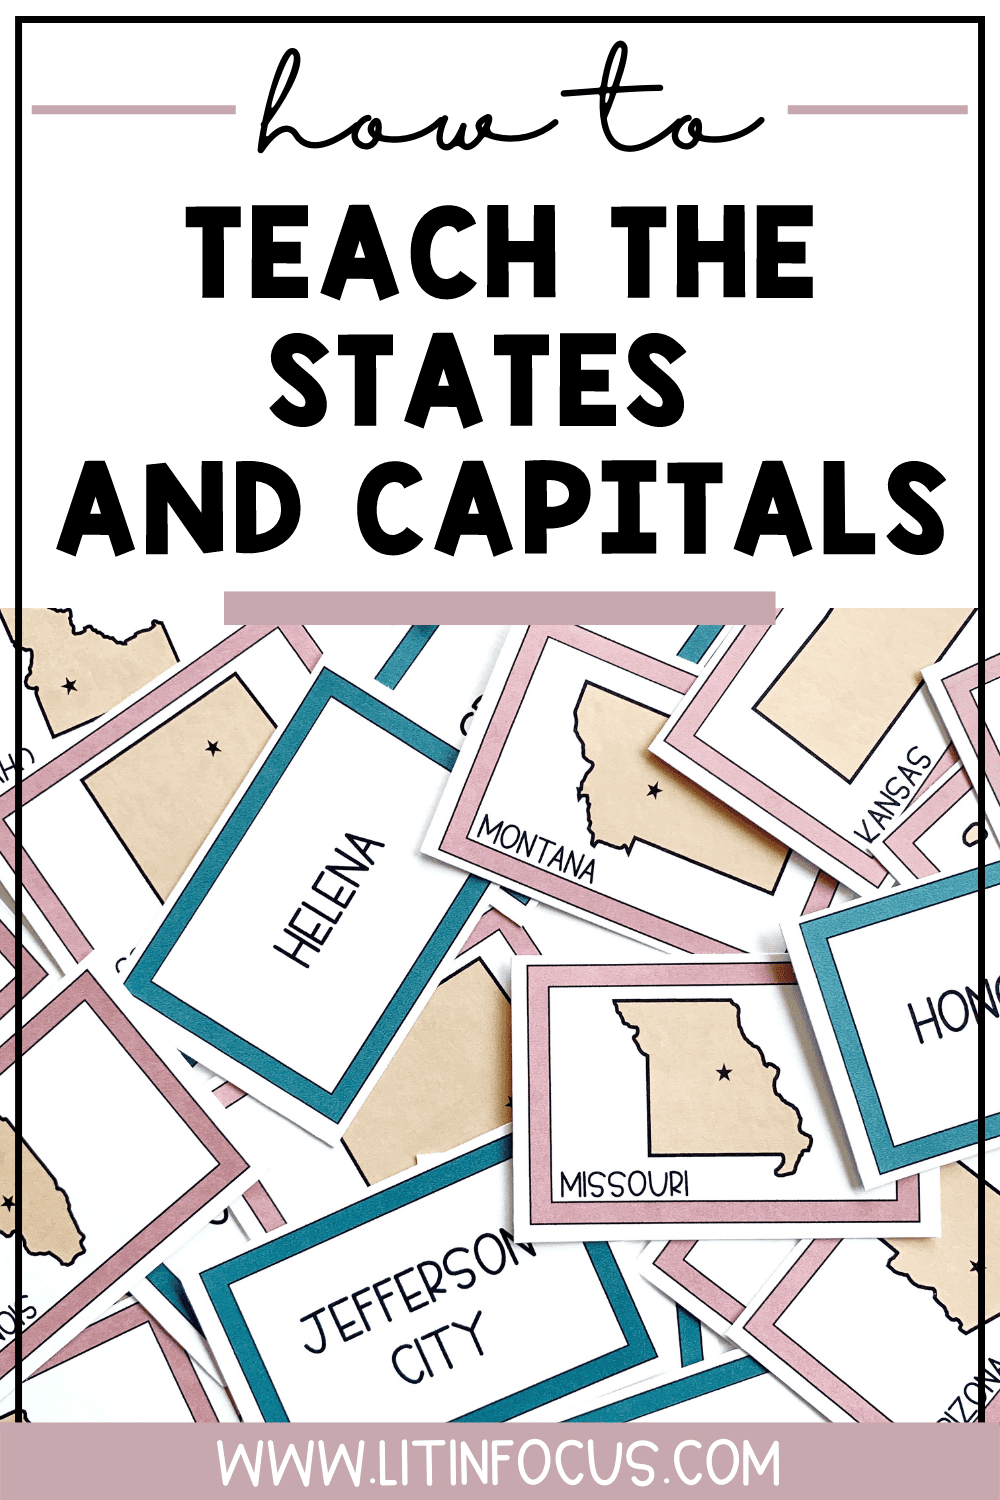 Ideas for Teaching the States and Capitals